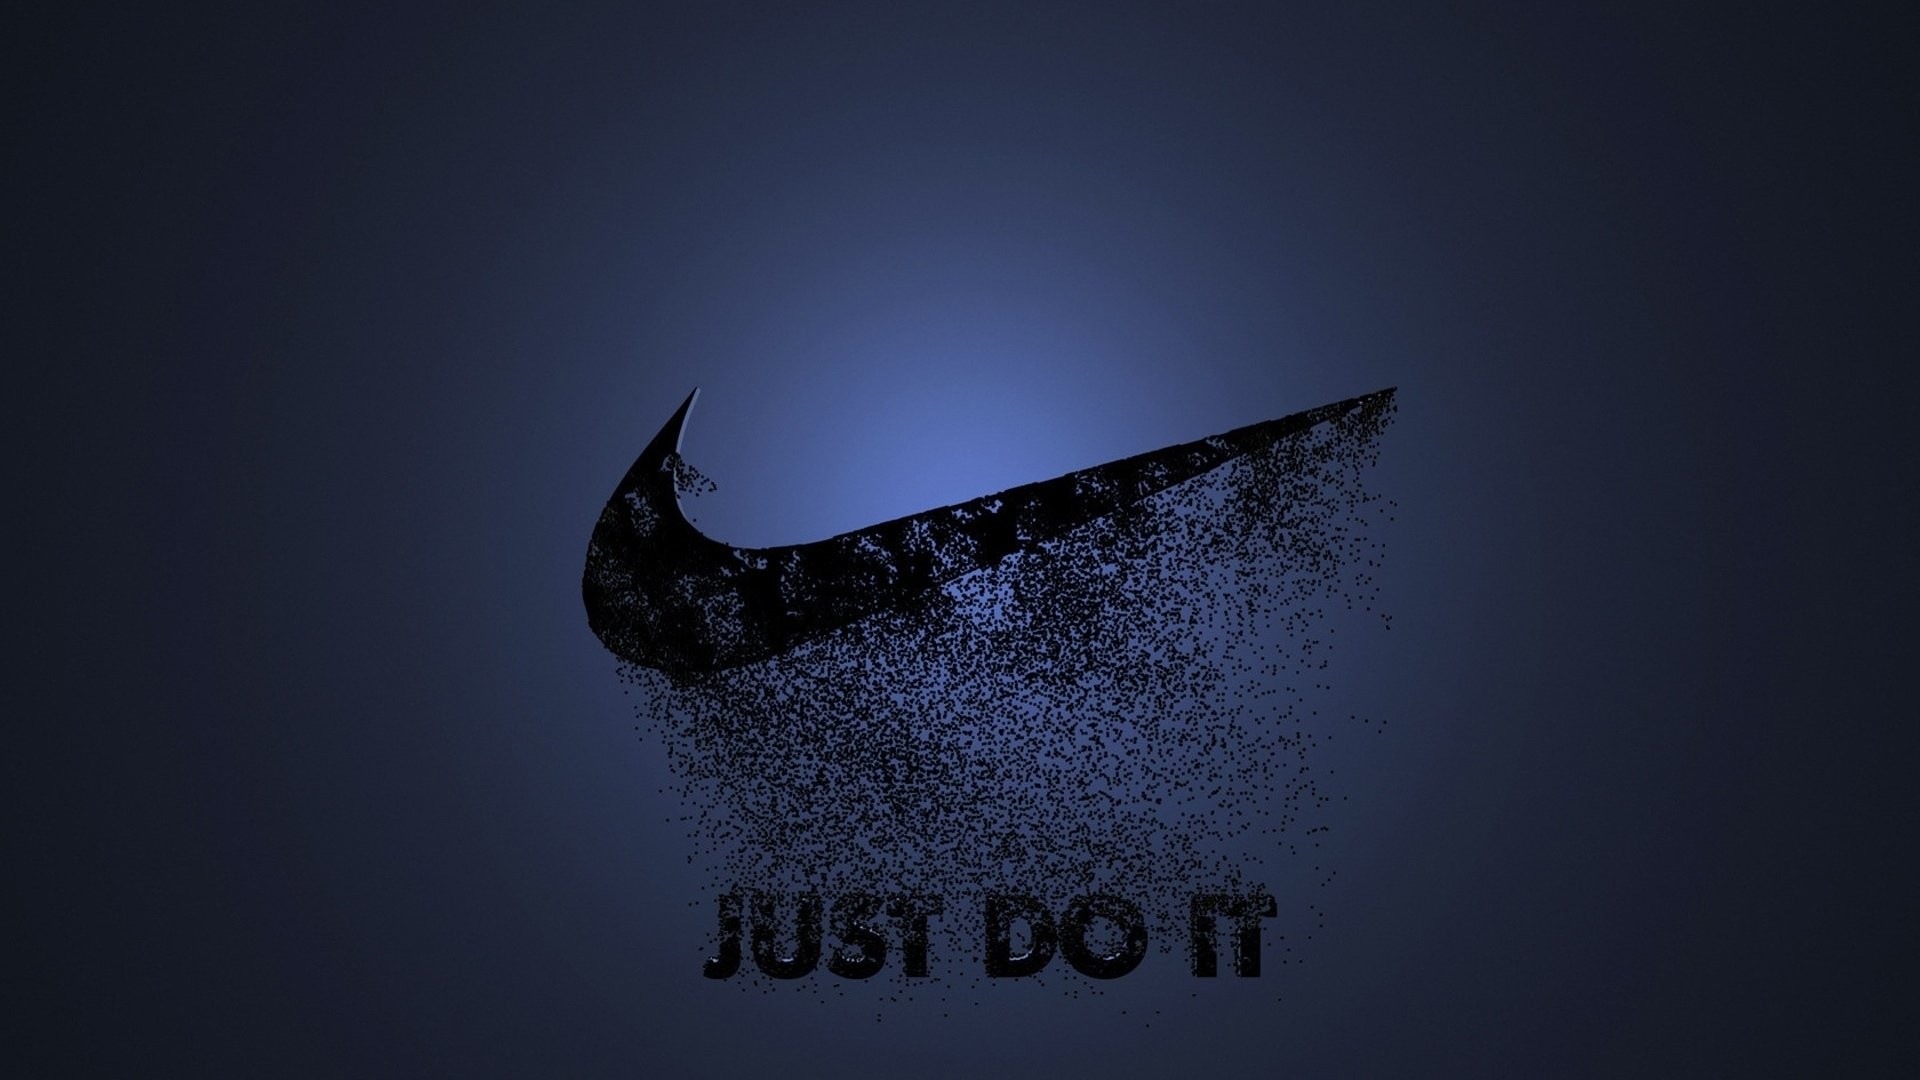 Nike Wallpaper Background The Best Image In